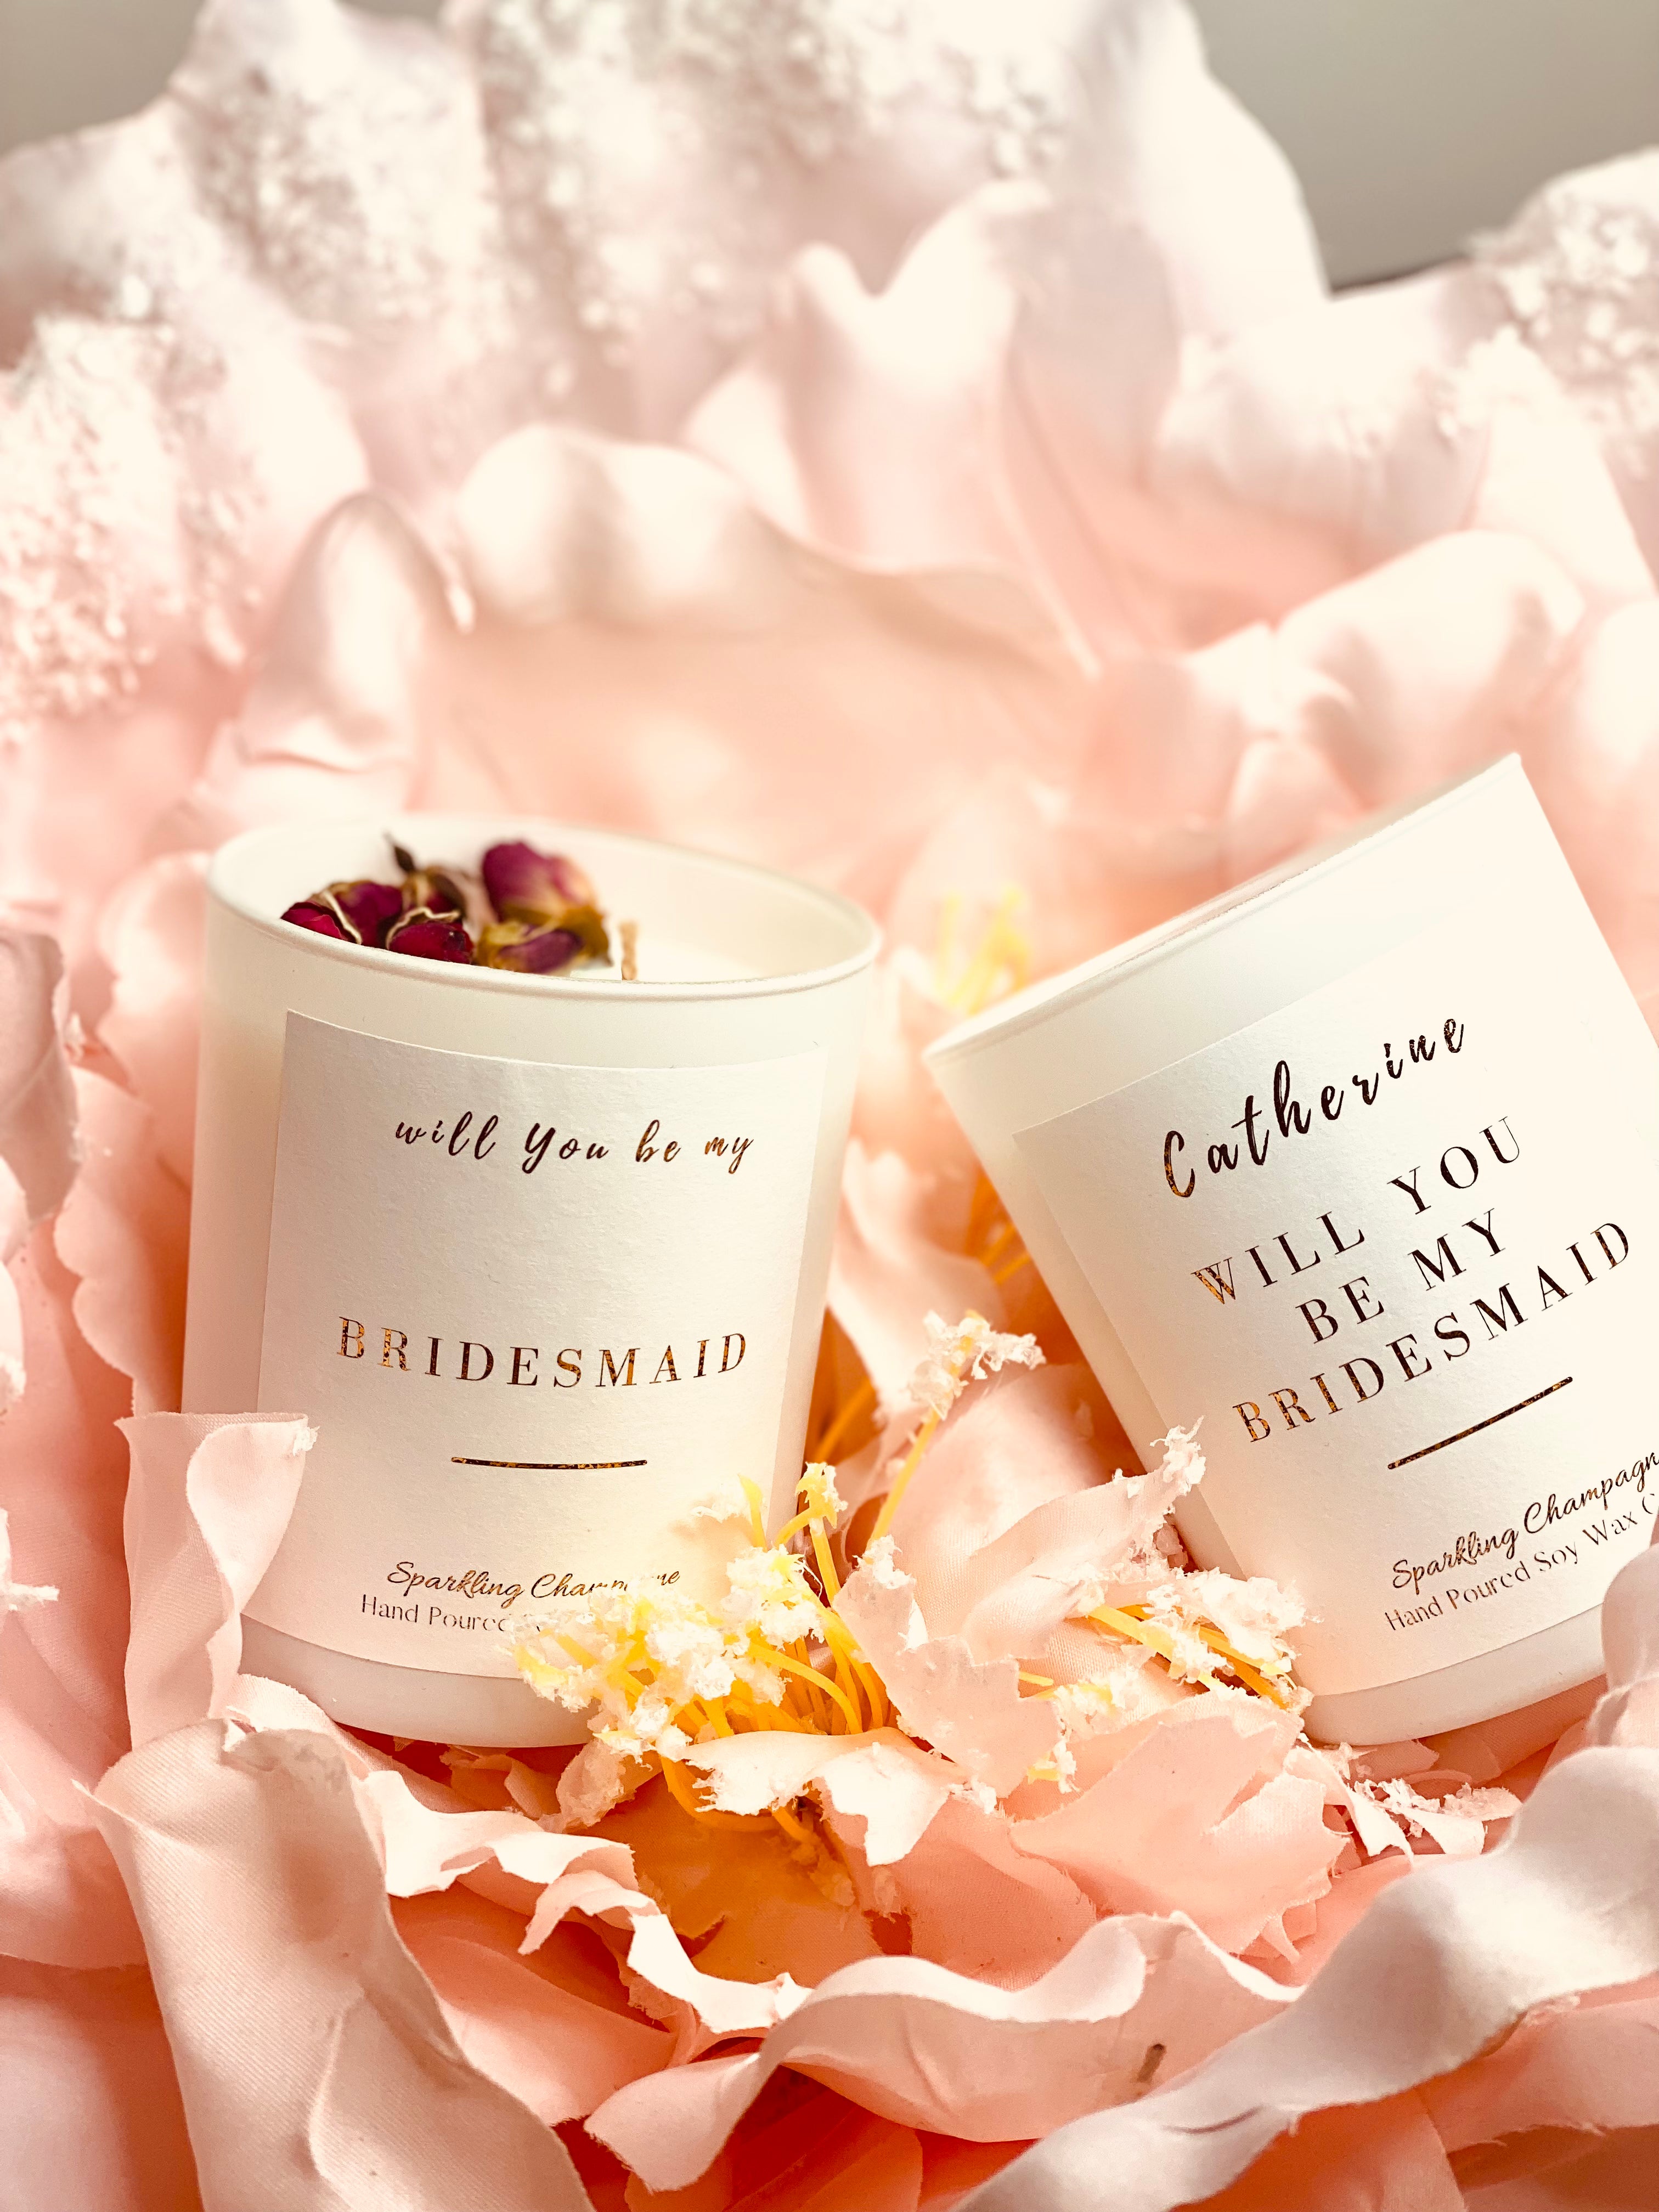 Indulge your bridesmaid in the ultimate luxury experience with our personalised candle. Give her the perfect surprise as you pop the question, and watch her delight as she realizes the thought and care you put into her gift. This elegant candle will make her feel special and appreciated on your big day.